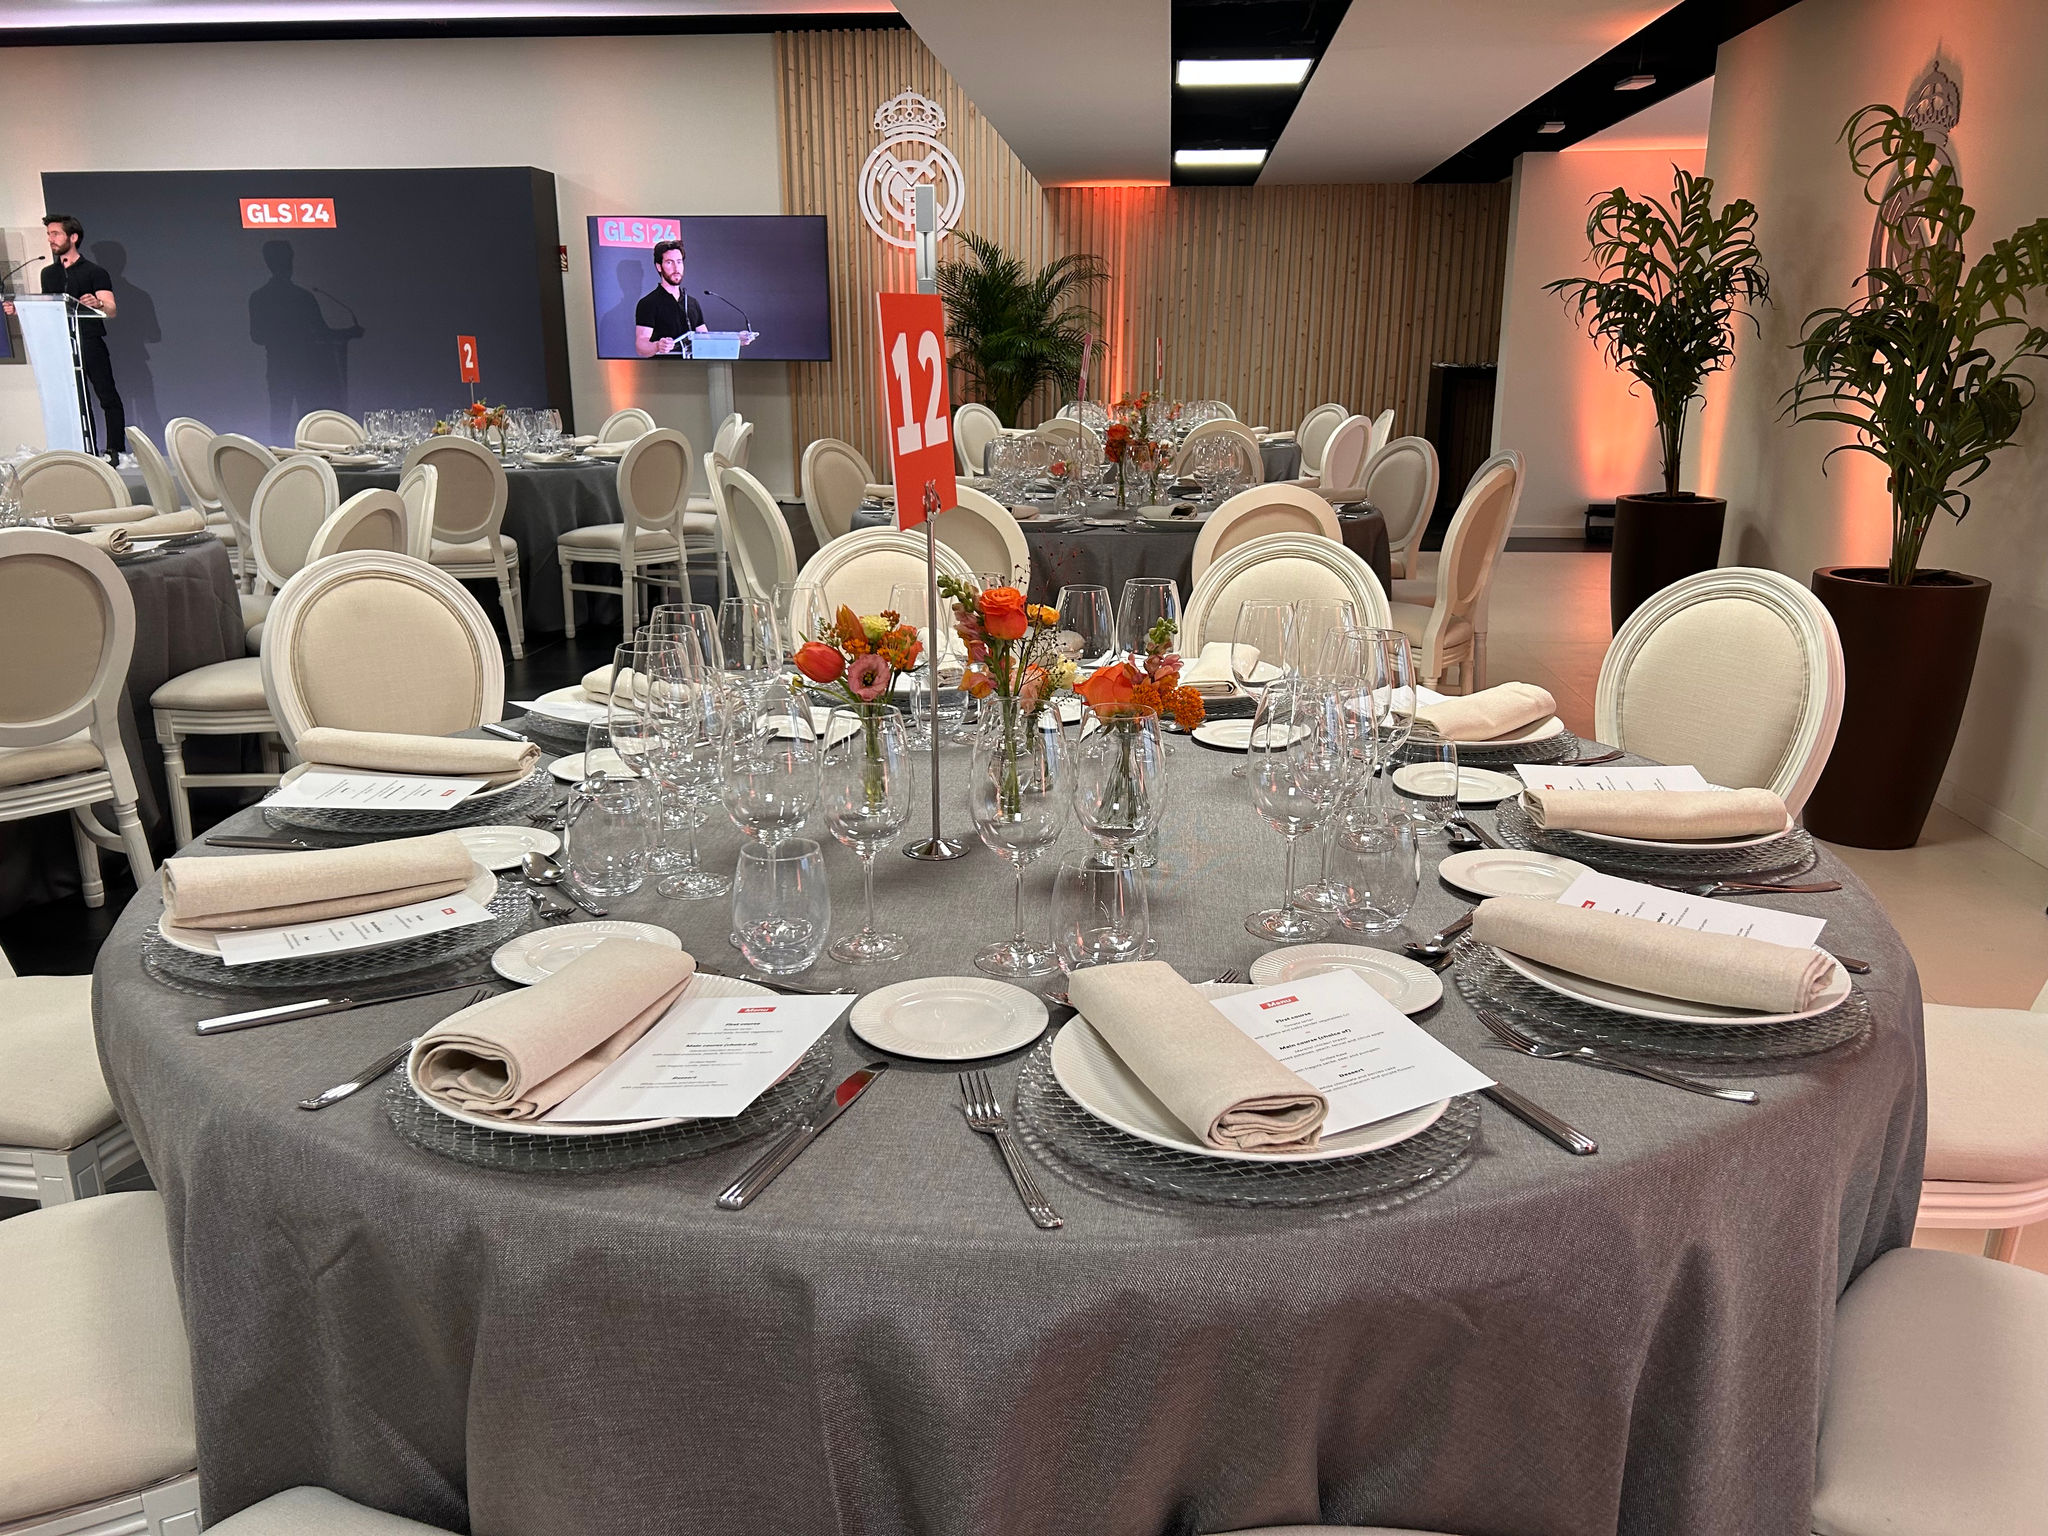 round table prepared for a dinner in palco de honor